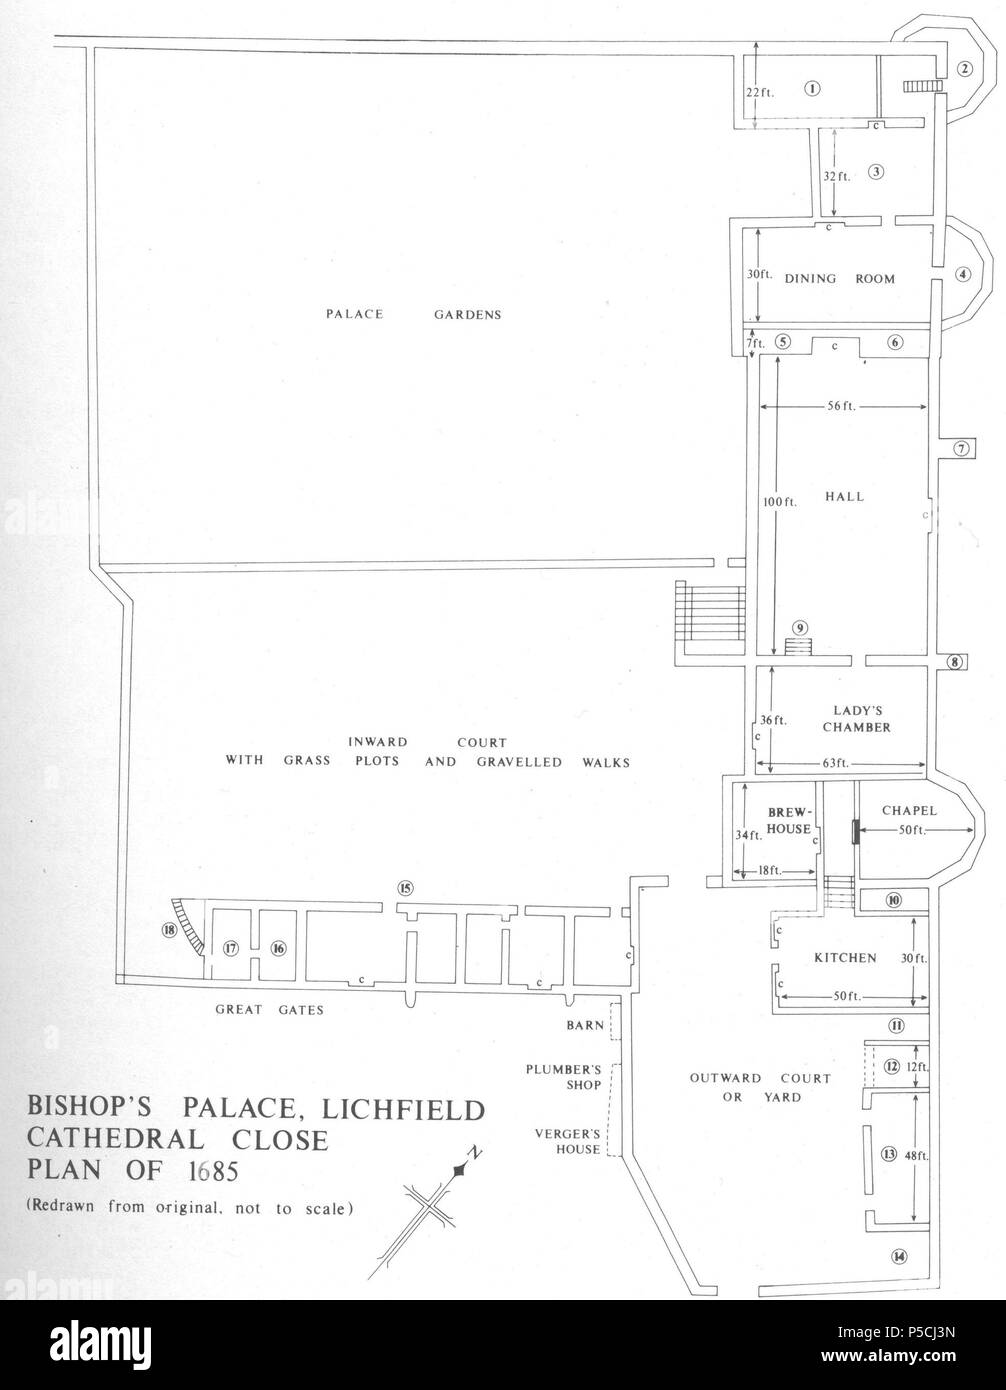 N/A. English: Bishop's Palace, Lichfield Cathedral Close, plan of 1685. Key: 1: Lodging or other room 2: Tower, 52ft high, each edge 13ft on the outside 3: Bishop's Lodging room 4: Second tower, each edge 10ft 5 & 6: Pantry 7 & 8: Buttery (i.e. buttress) made out into the Dimples 9: Stairs into passage under Ladies Chamber 10: Open ground for a sough for the rain water from the roofs of the chapel and kitchen 11: Open ground for pens for poultry etc. 12: Coach house with folding doors 13: Stables 14: Where there was a dunghill 15: Lodging rooms for the Bishop's gentlemen, 20ft high 16: Porter' Stock Photo